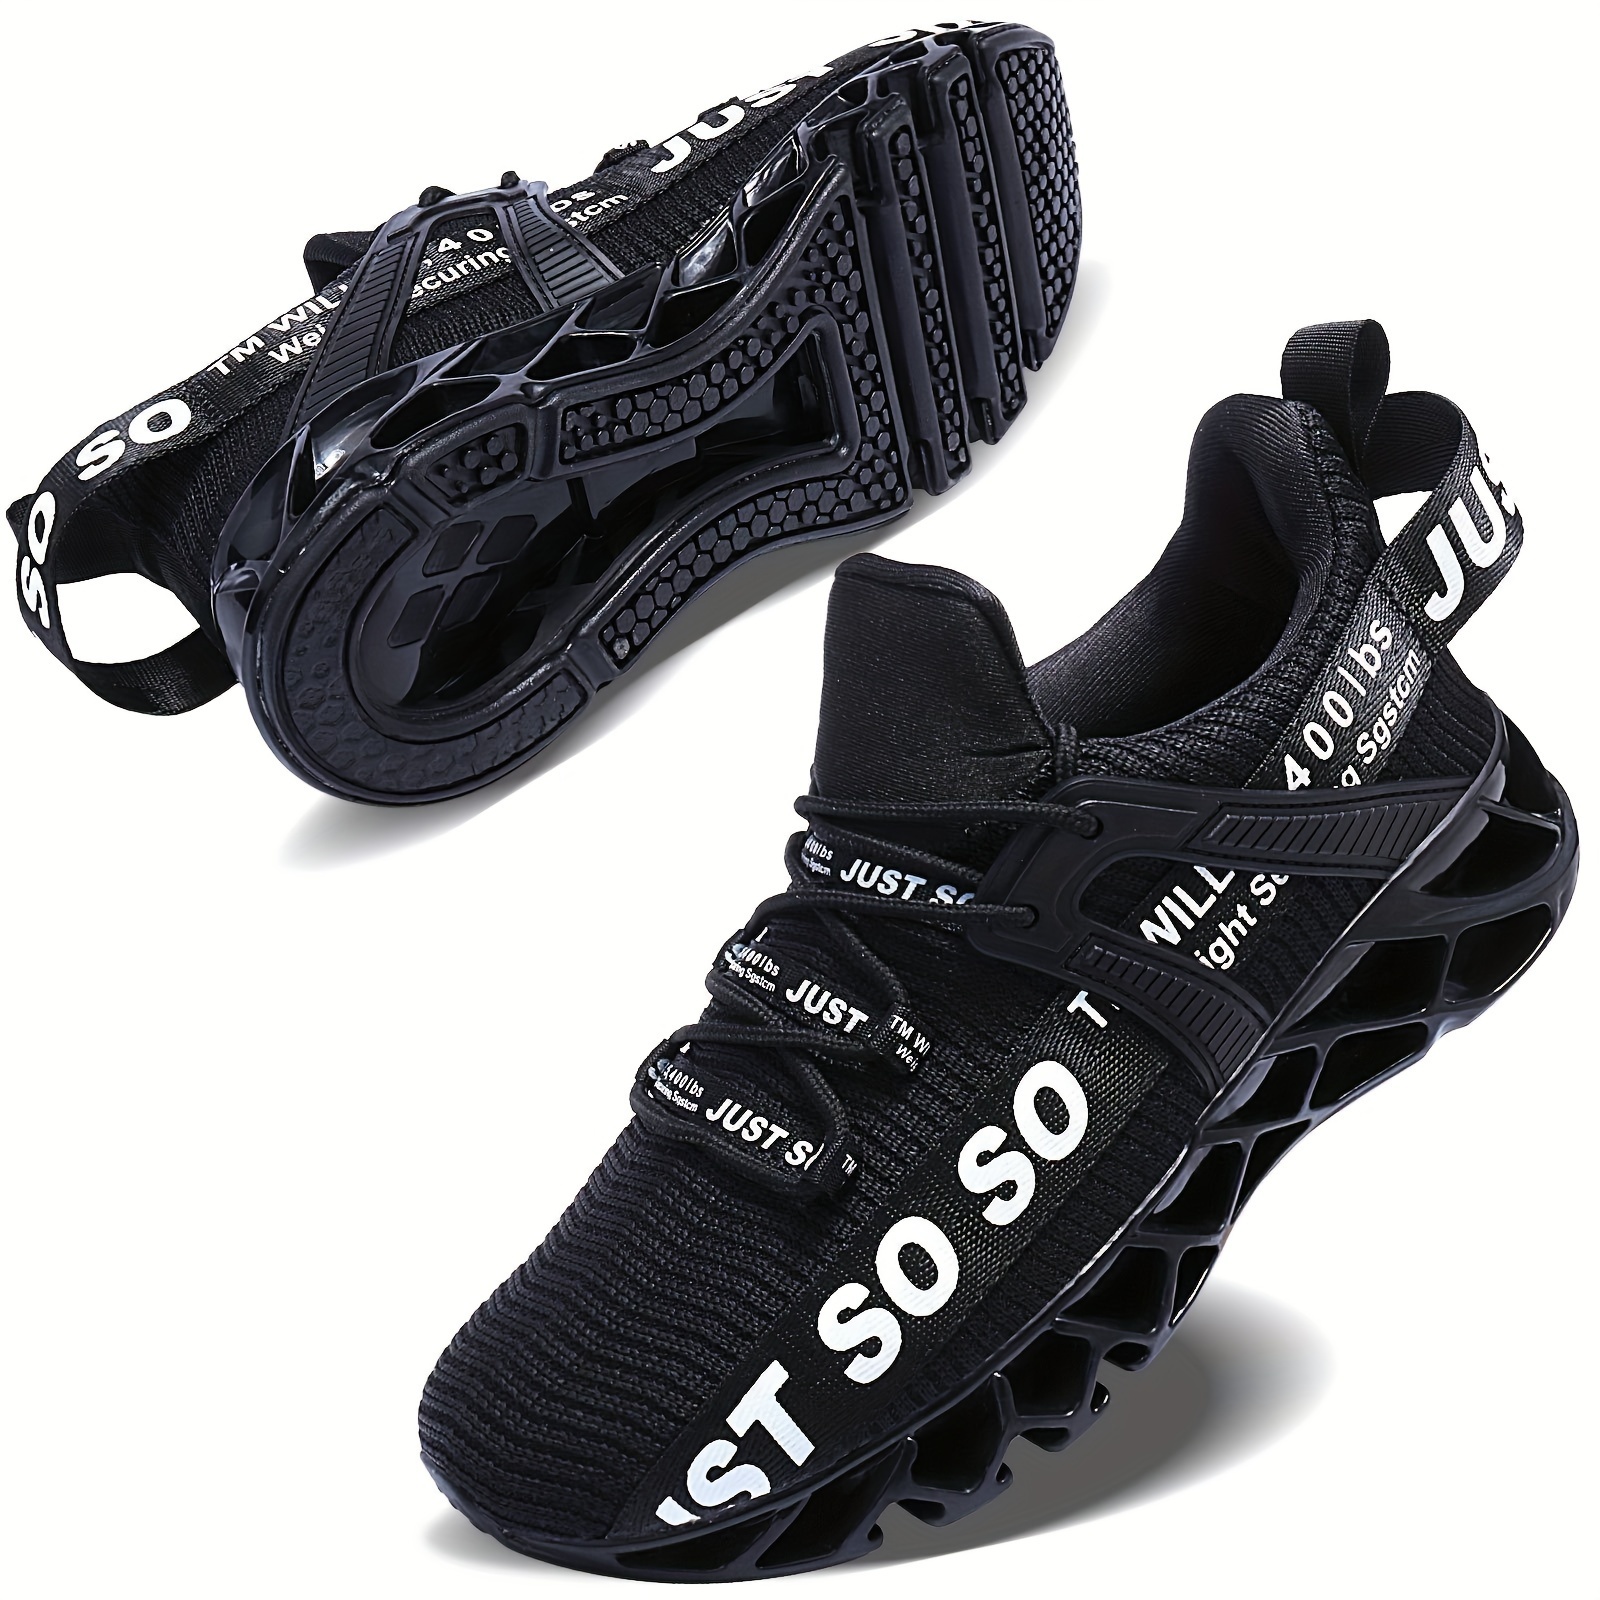 

Women's Just So So Shoes Fashion Lightweight Sneakers, Breathable Athletic Running Shoes, Casual Sport Footwear